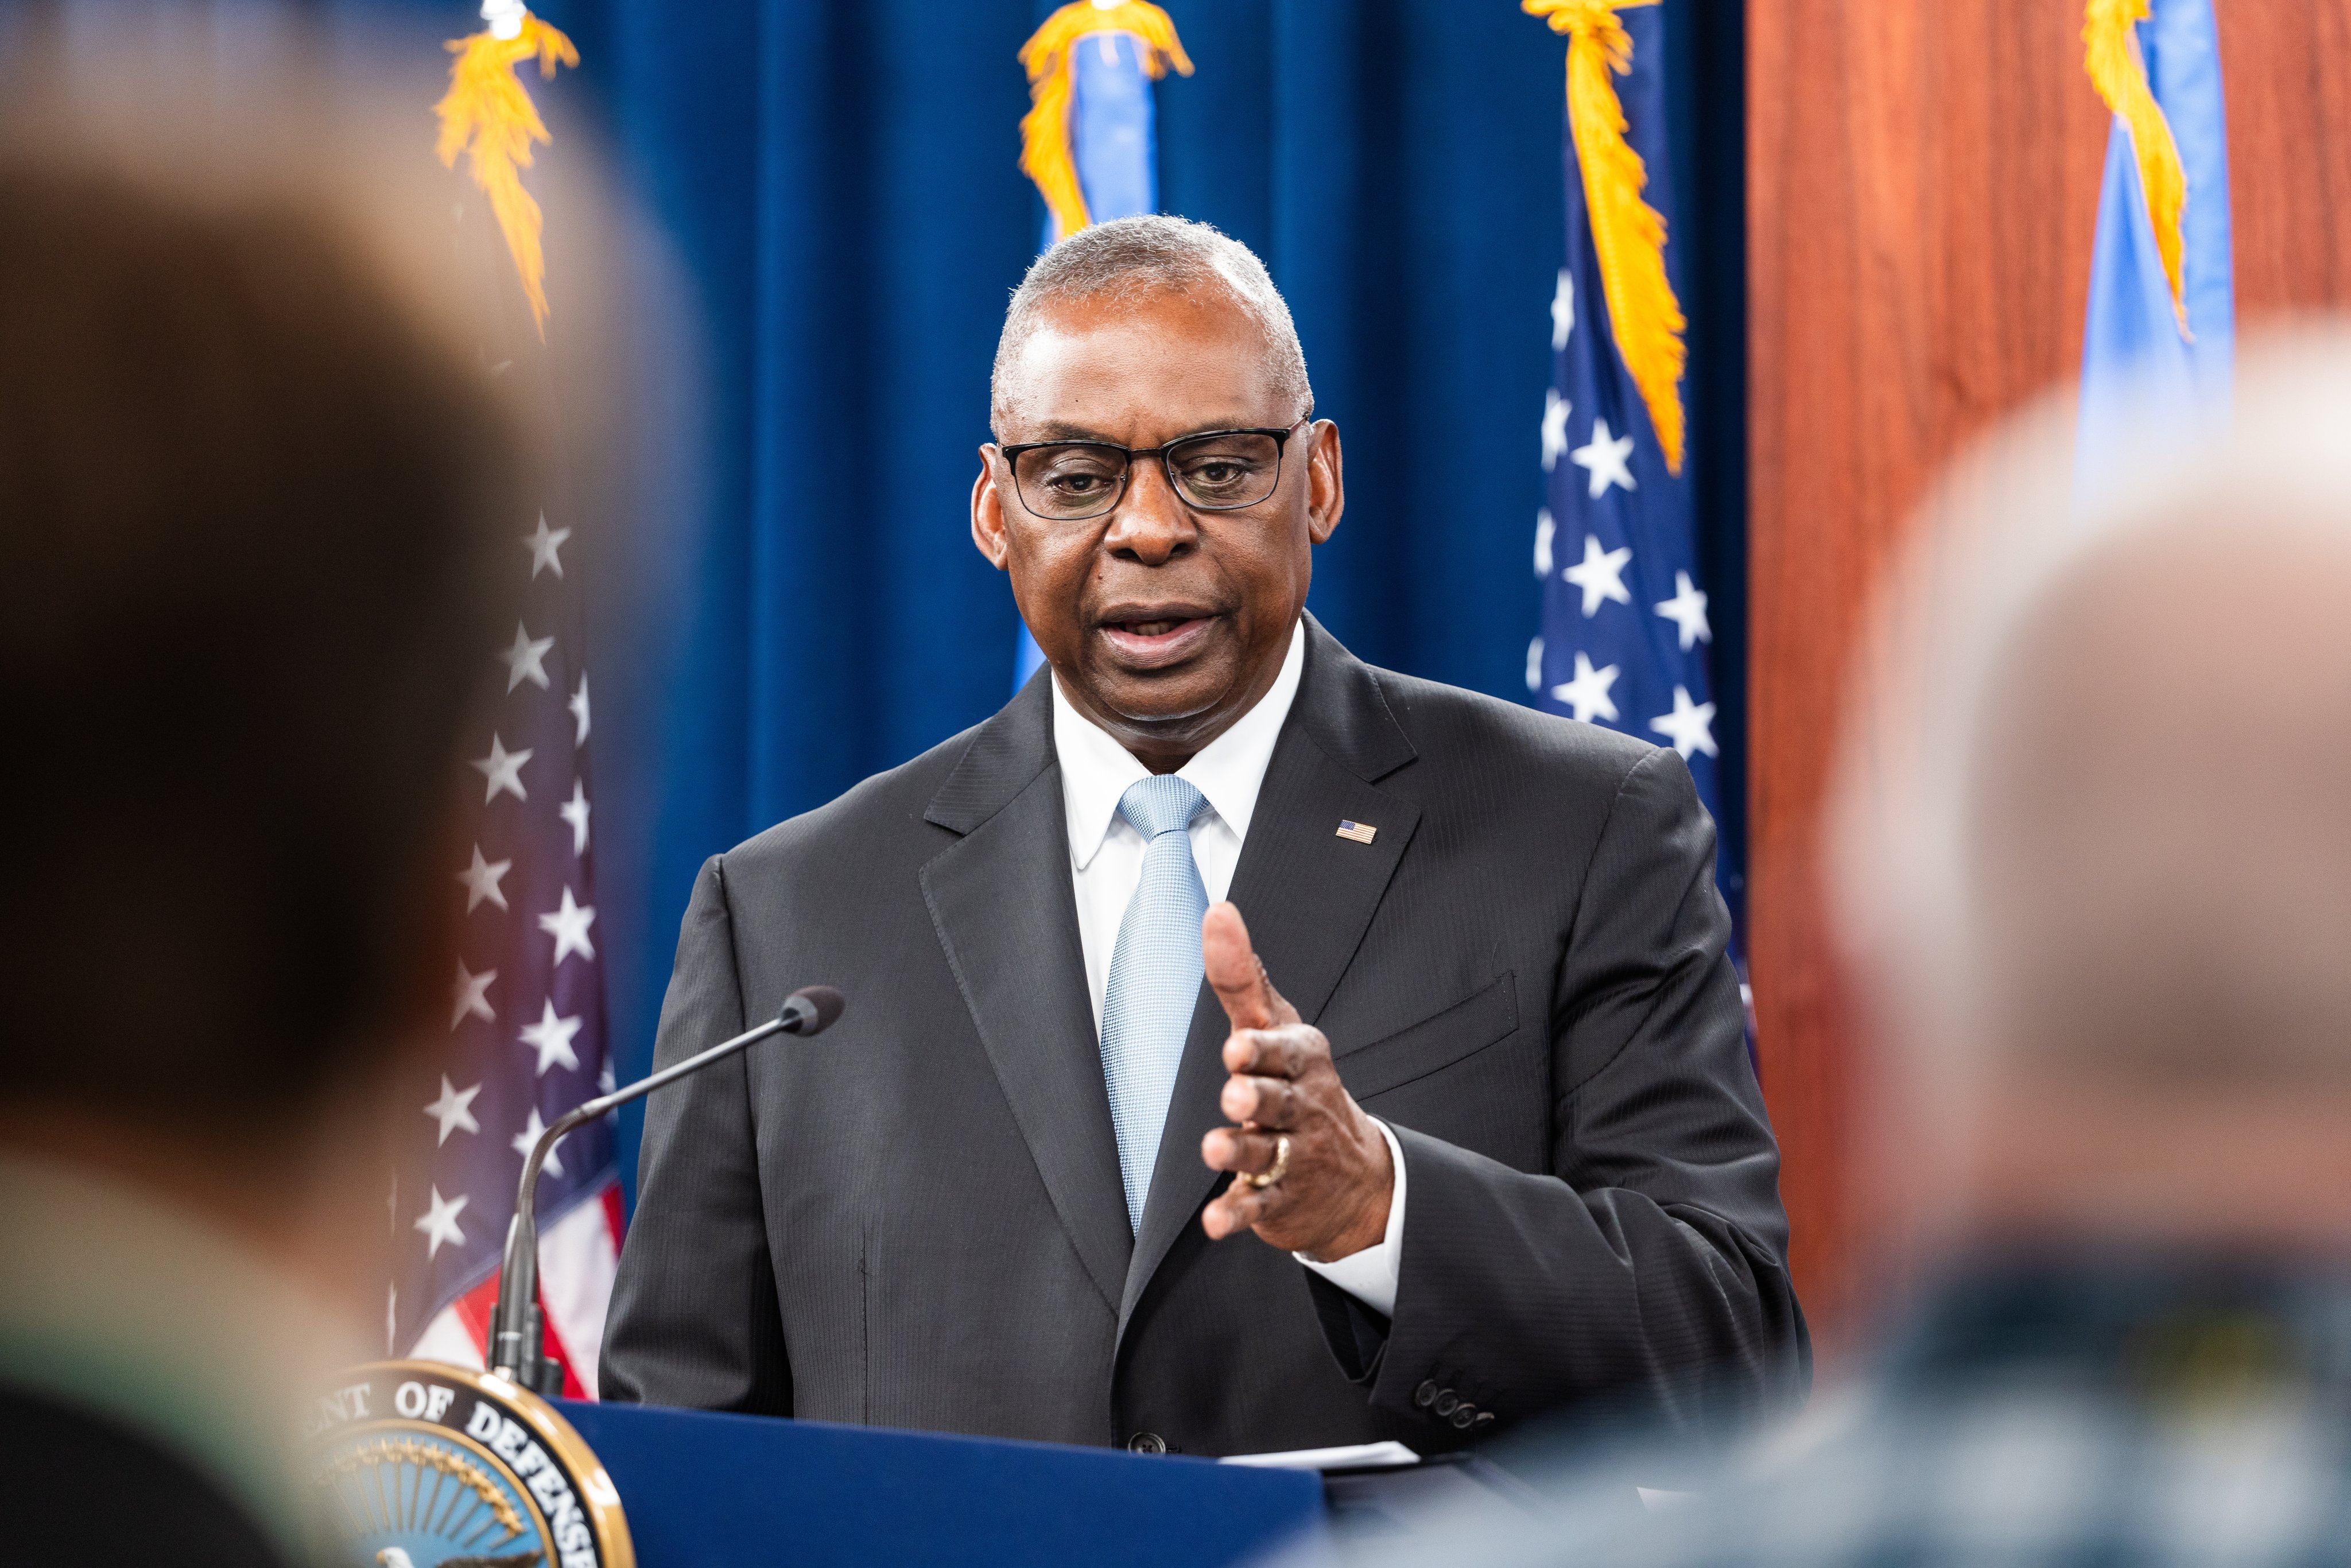 US Secretary of Defence Lloyd Austin attends a press conference at the Pentagon in Arlington, Virginia, on May 20. Photo: EPA-EFE